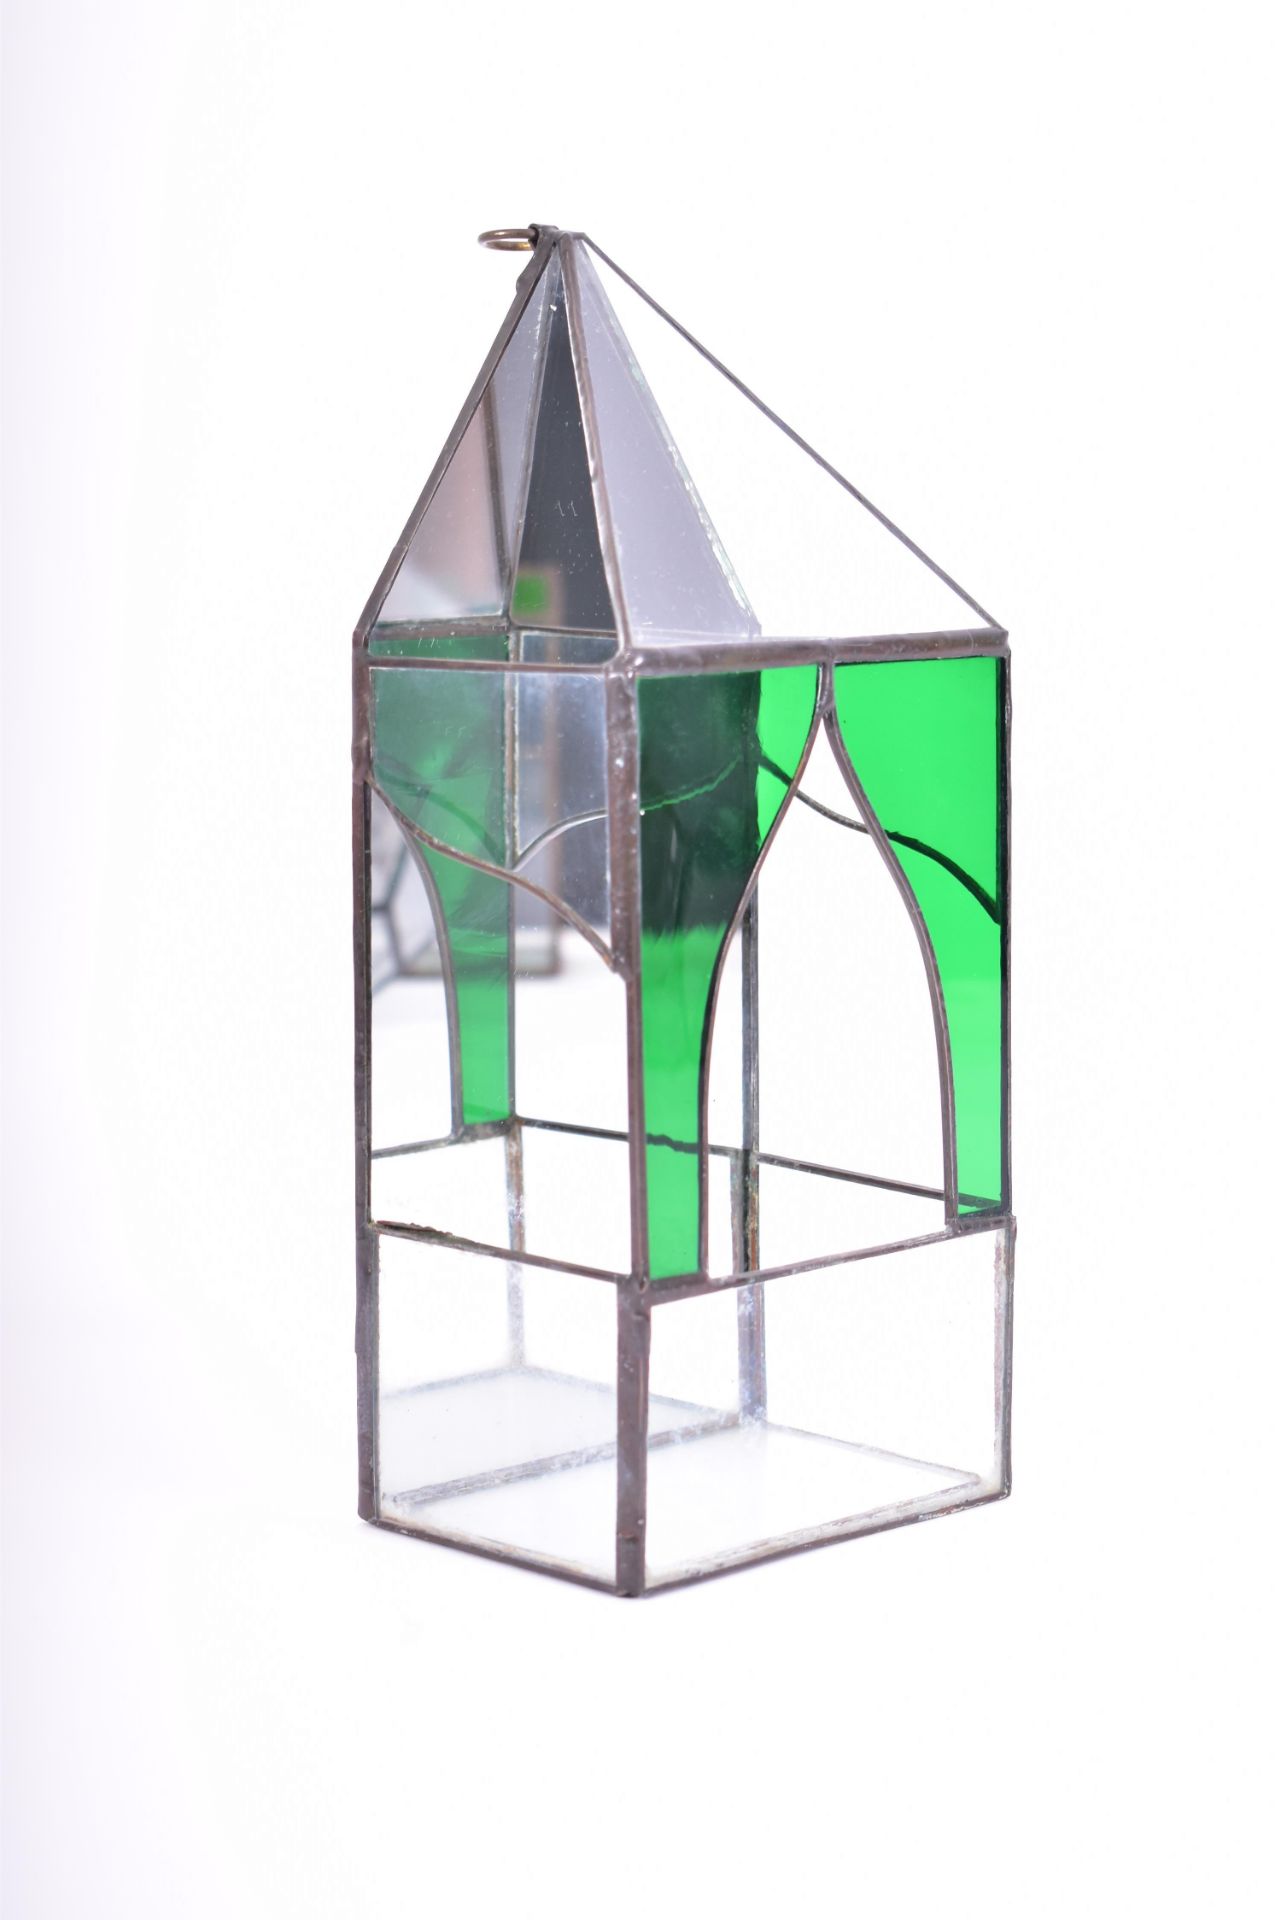 COLLECTION OF FIVE GLASS TERRARIUMS / ATRIUMS - Image 10 of 11